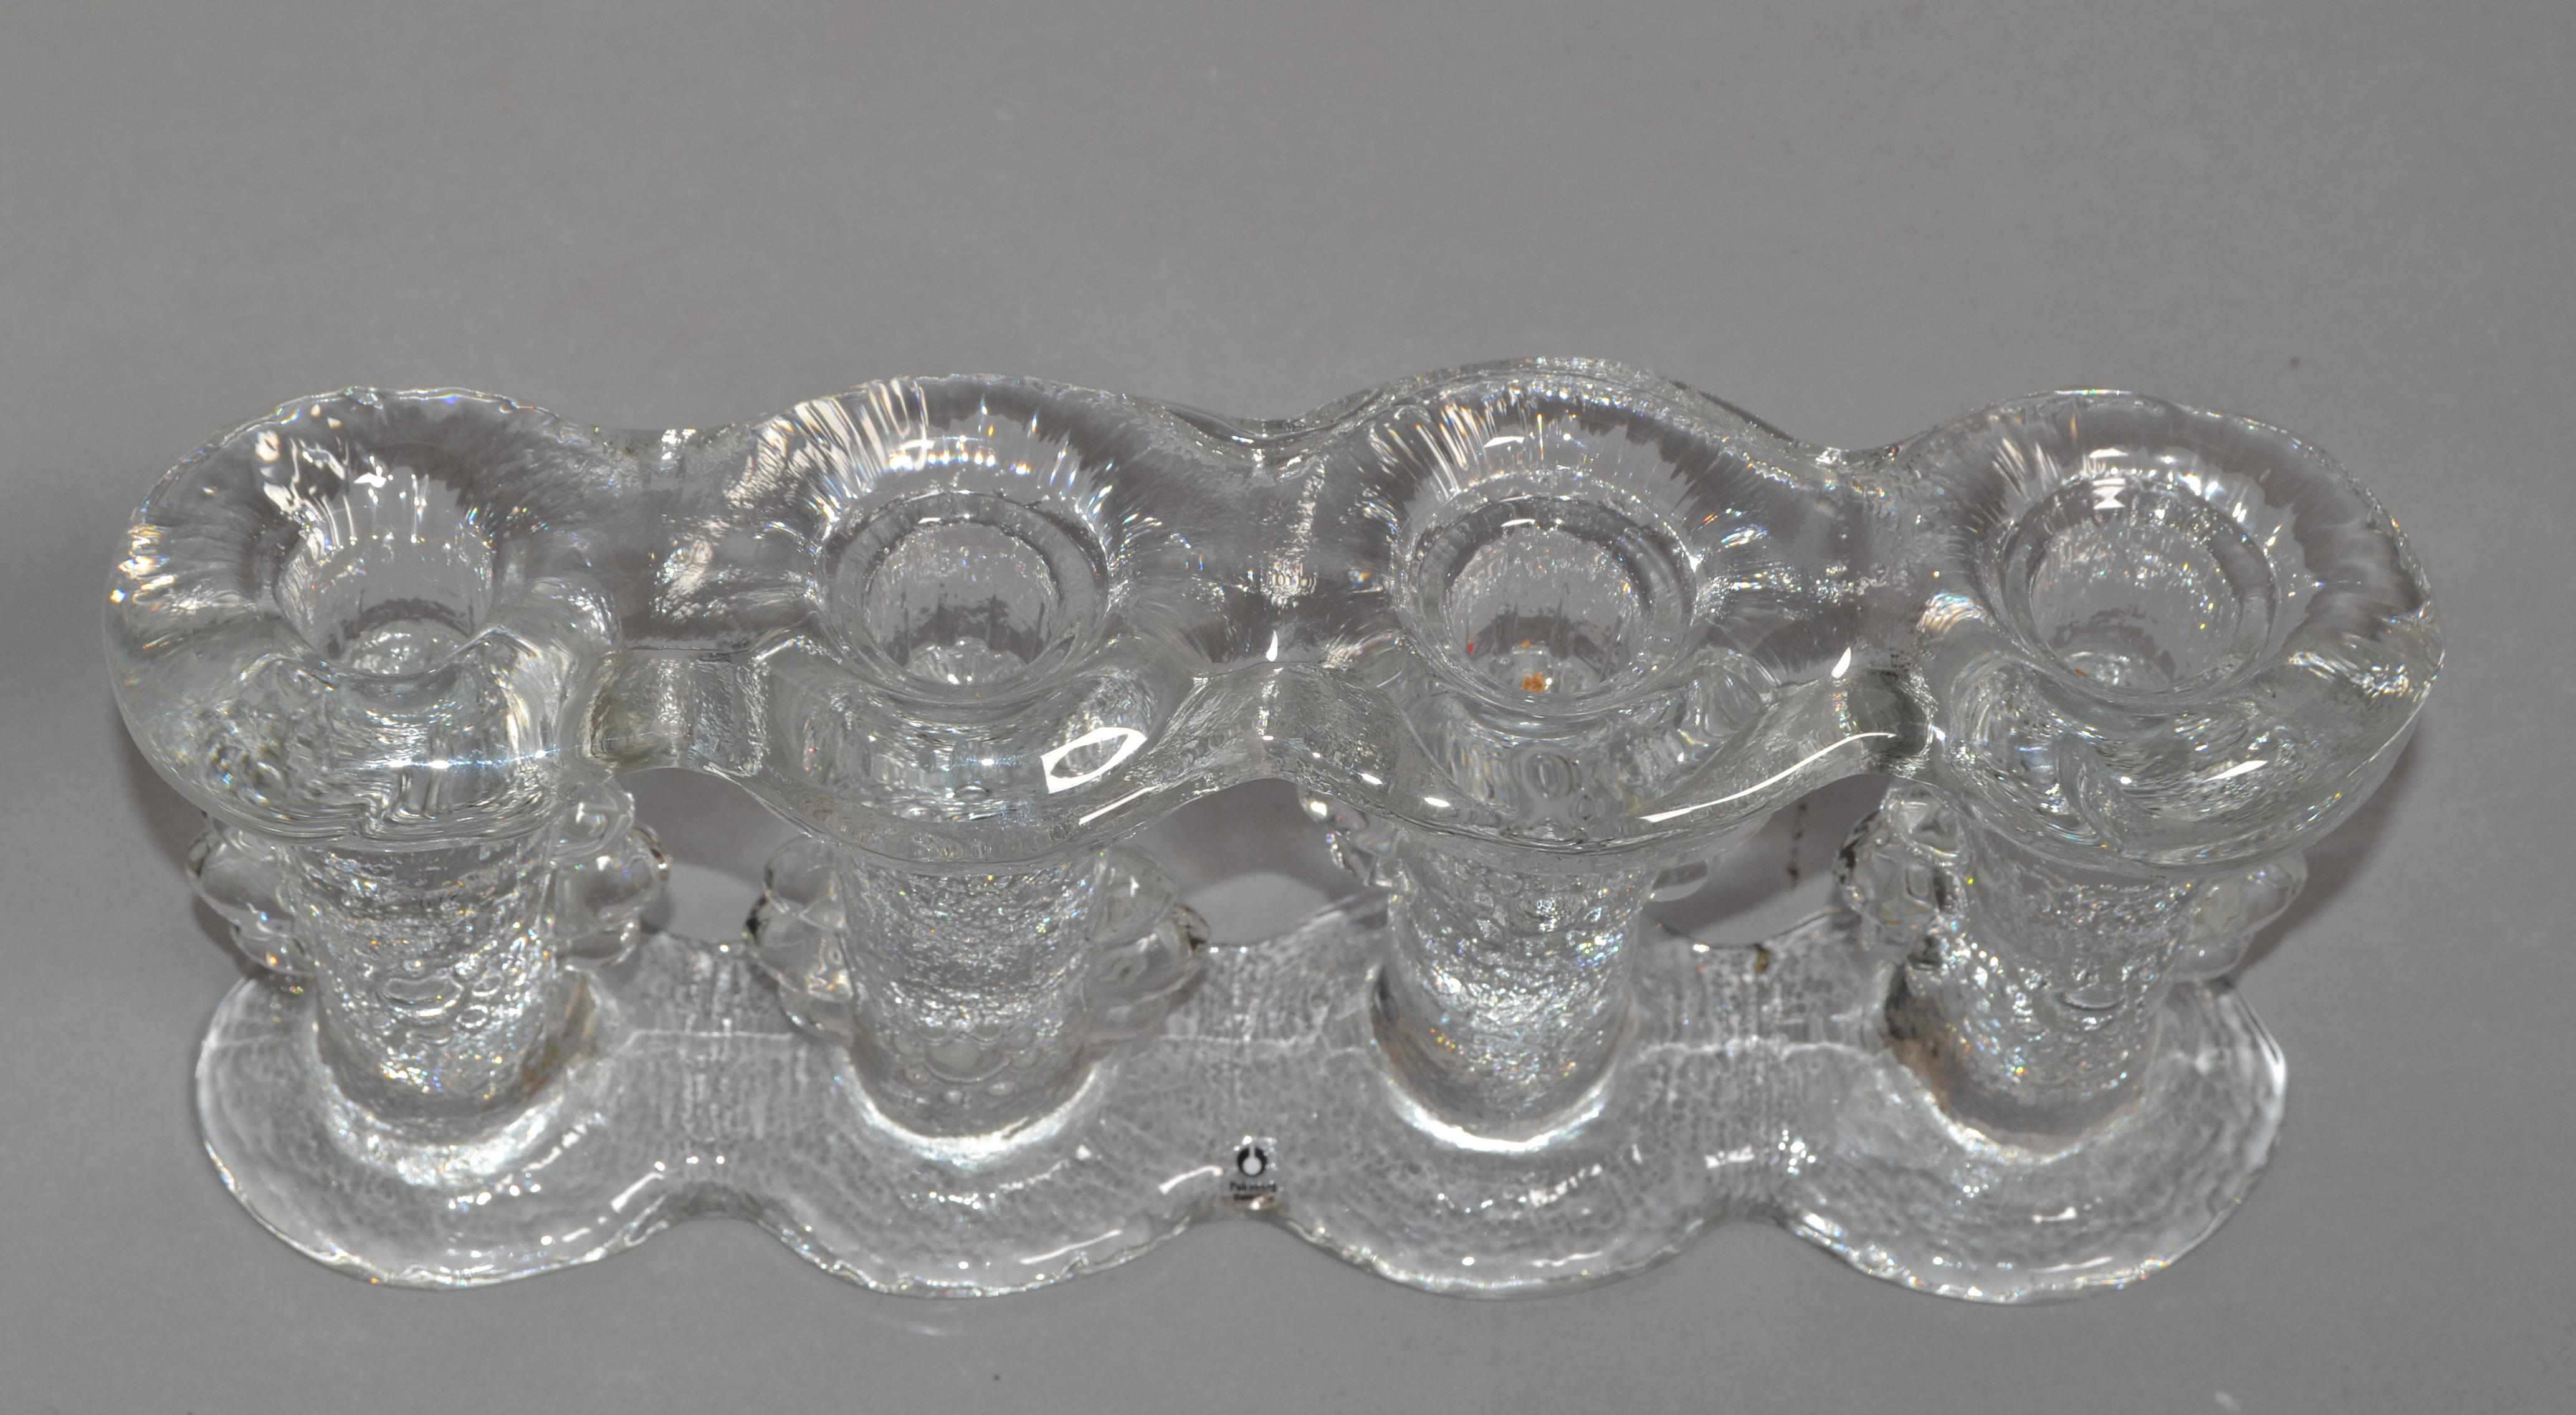 One Piece 4 Glass Candle Holder by Staffan Gellerstedt for Pukeberg Sweden 1970 In Good Condition For Sale In Miami, FL